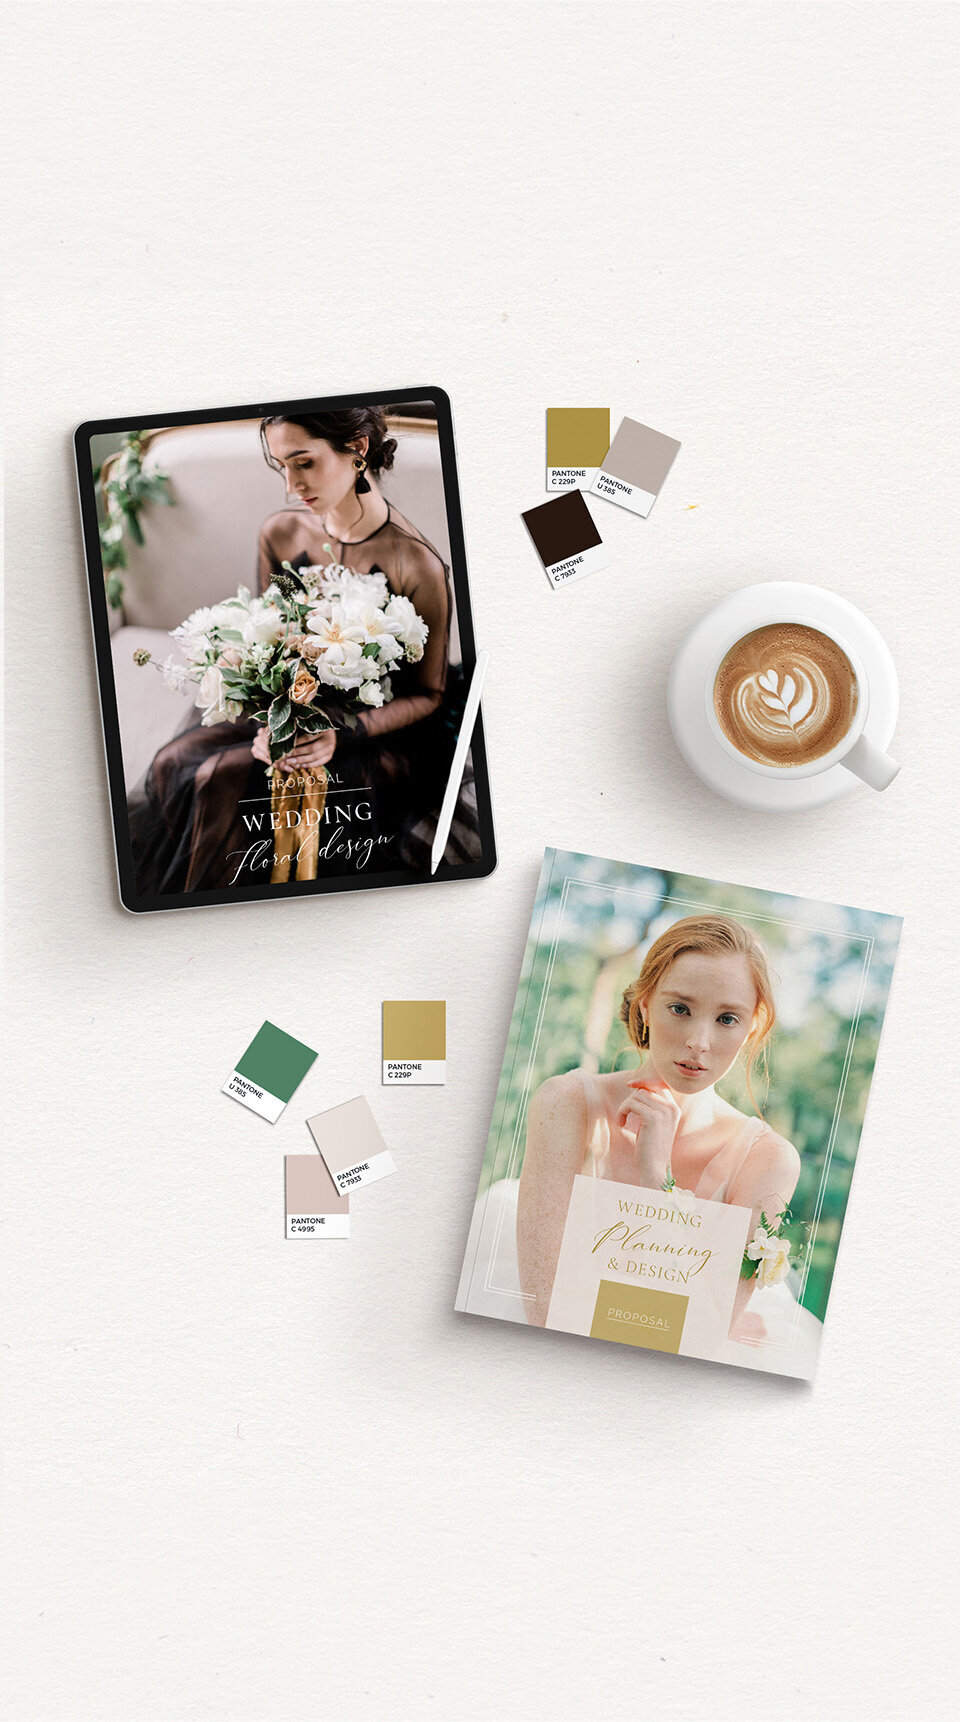 Brilliant Client Proposals Course and Templates for wedding professionals11_Cover_Copyright Andreea Bucur_960x1722px